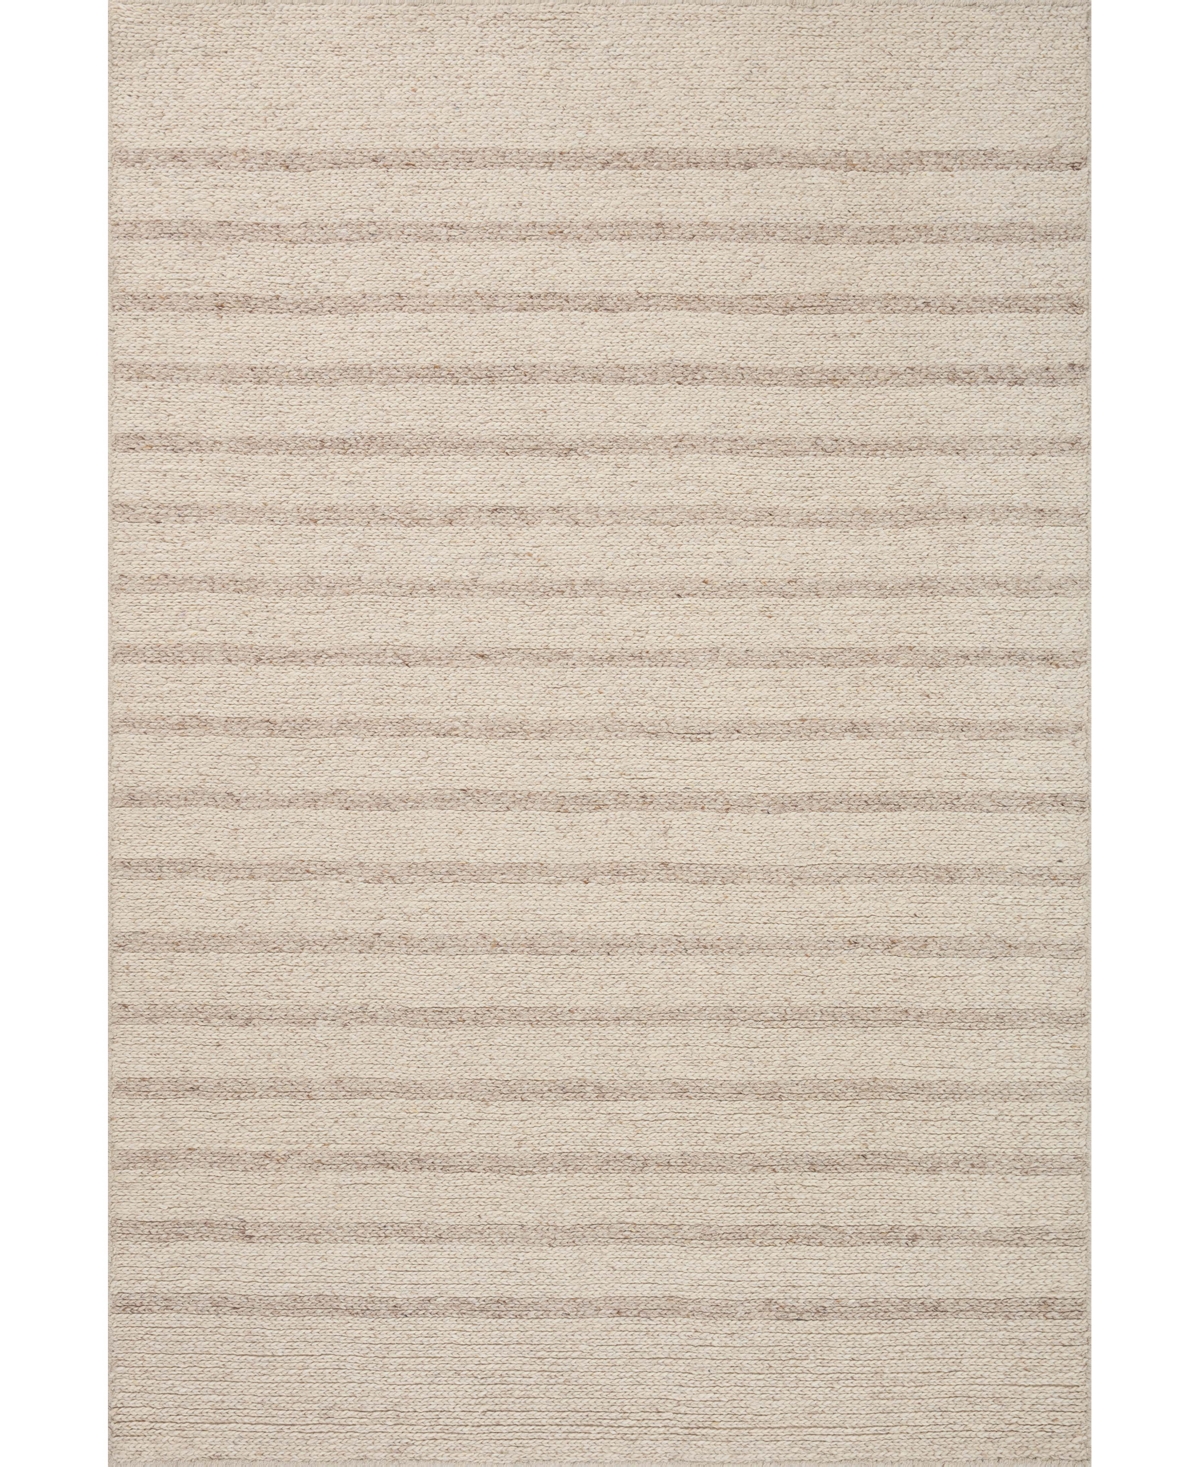 Magnolia Home By Joanna Gaines X Loloi Ashby Ash-01 5' X 7'6" Area Rug In Oatmeal